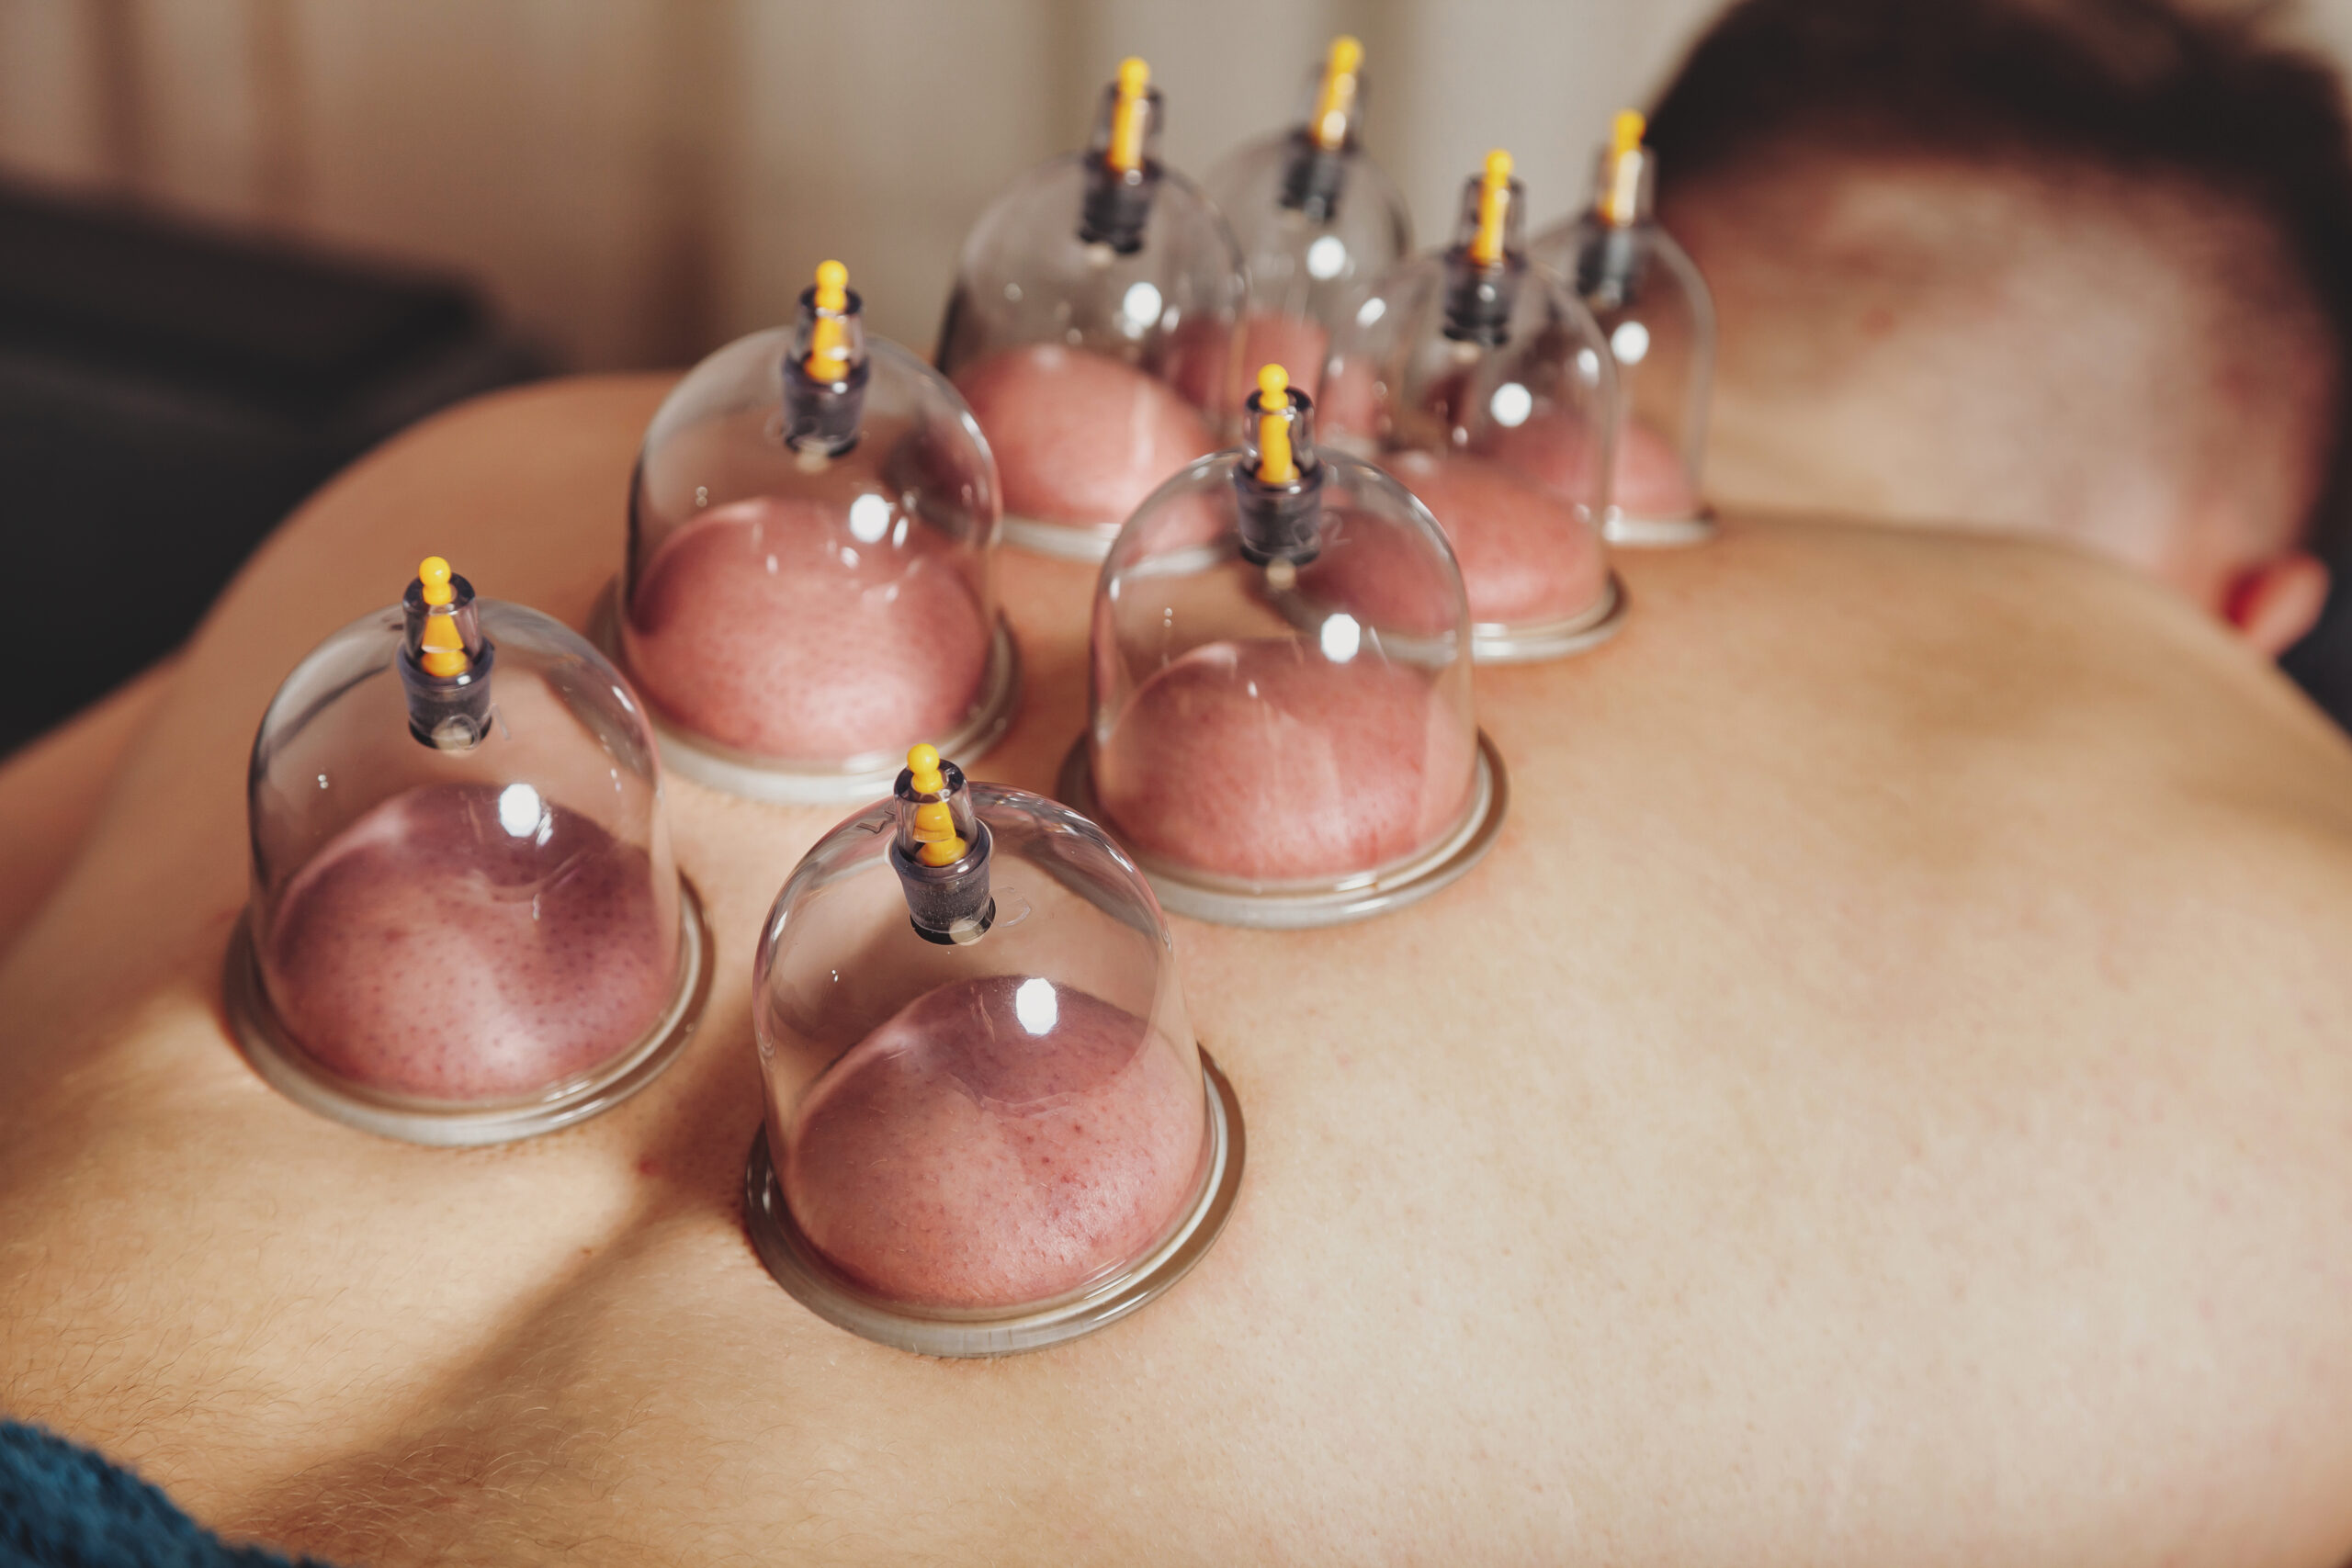 Close-up for multiple vacuum cups, medical cupping therapy on human body. Doctor with cups for patient, therapy. Wellness, health injury rehabilitation concept. Alternative medicine. Copy space